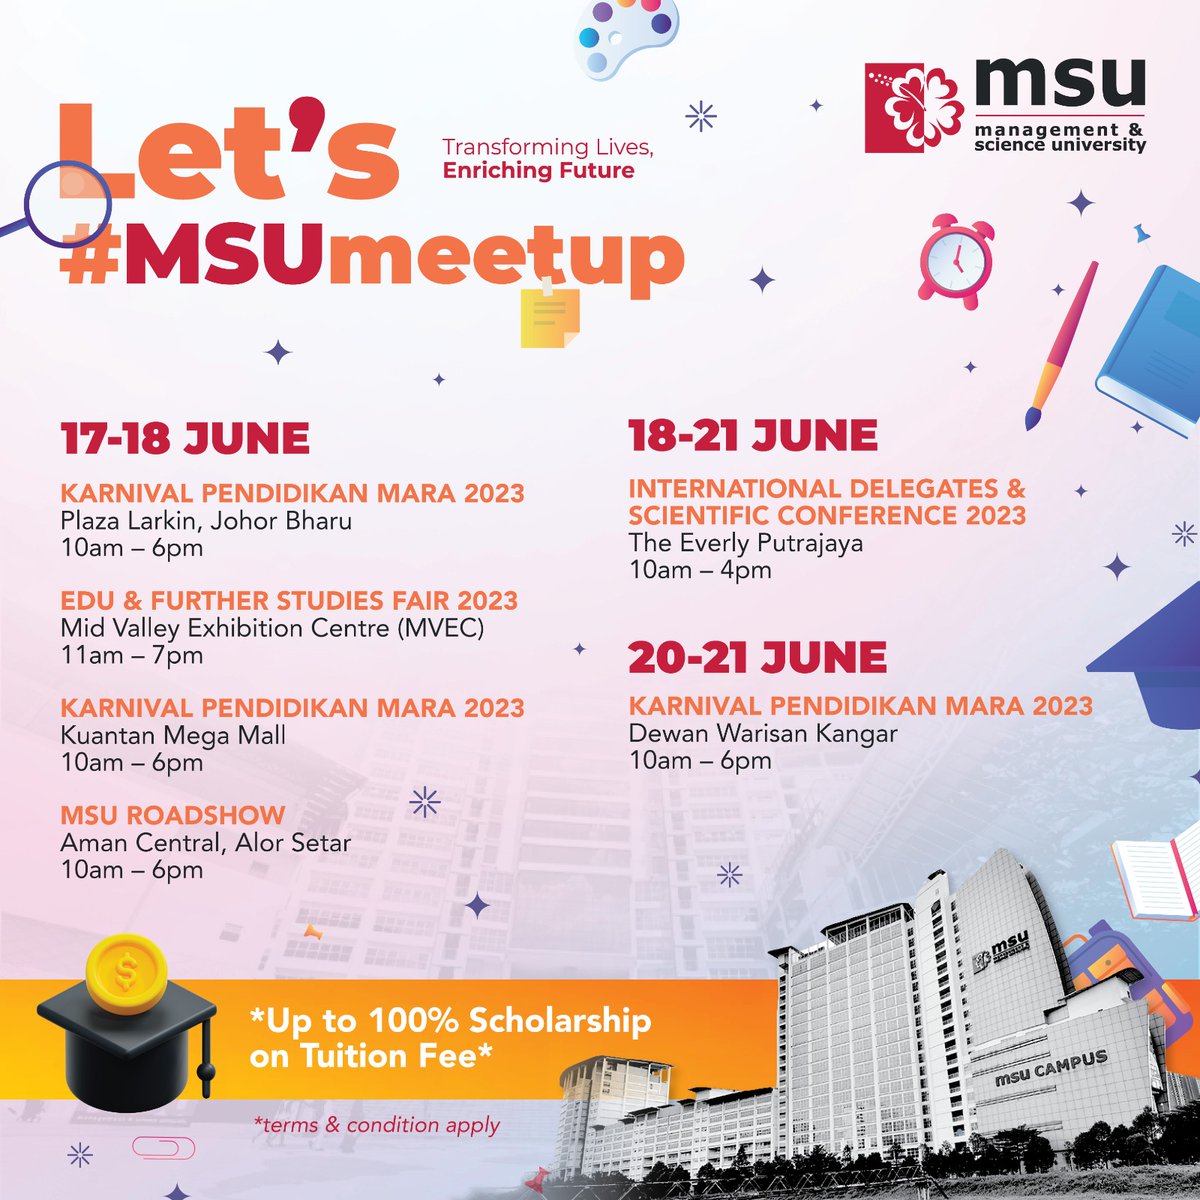 To all #SPM2022 leavers!! Don't miss out our #MSUmeetup! Discover your dream program & seize the chance to secure @YayasanMSU scholarship up to 100%* Explore various programs waiting for you at @MSUmalaysia Let us help you kickstart your educational journey on the RIGHT foot!!